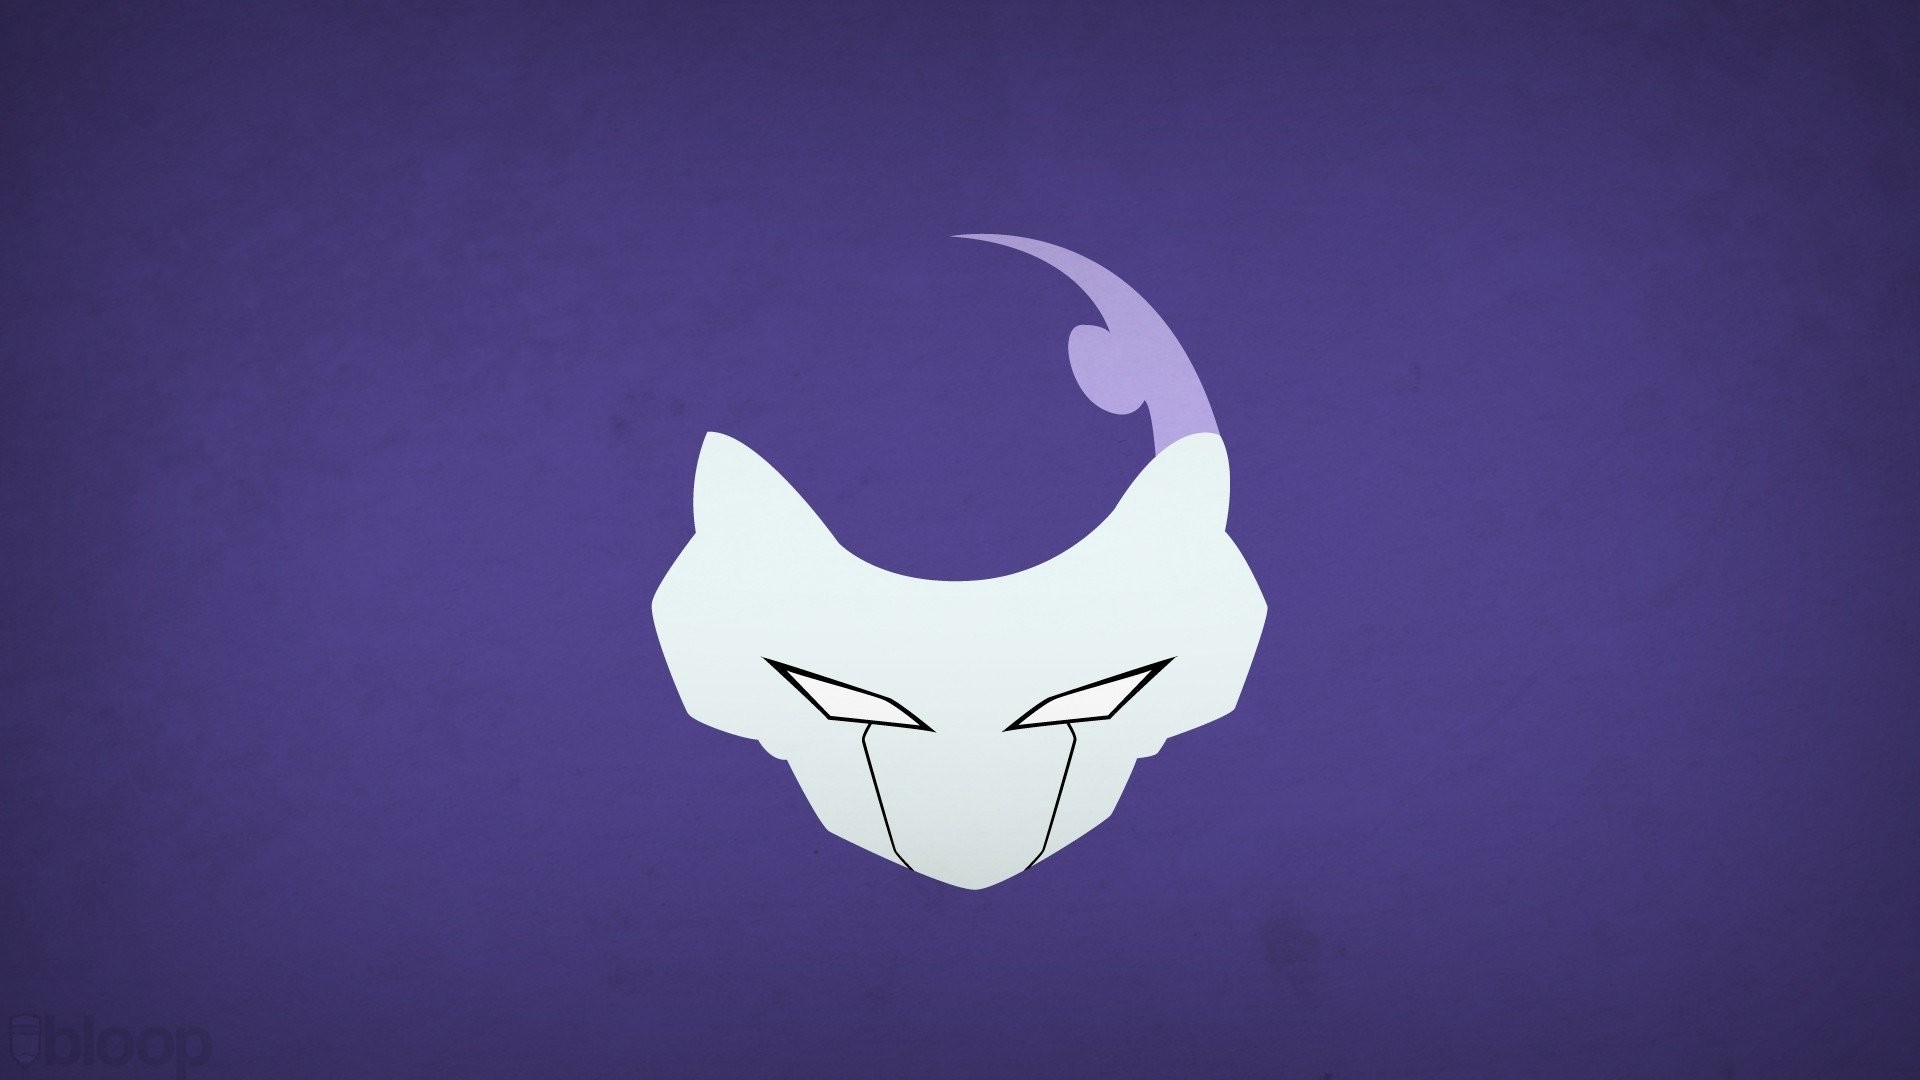 Minimalism Dragon Ball Frieza Superheroes free iPhone or Android Full HD wallpaper